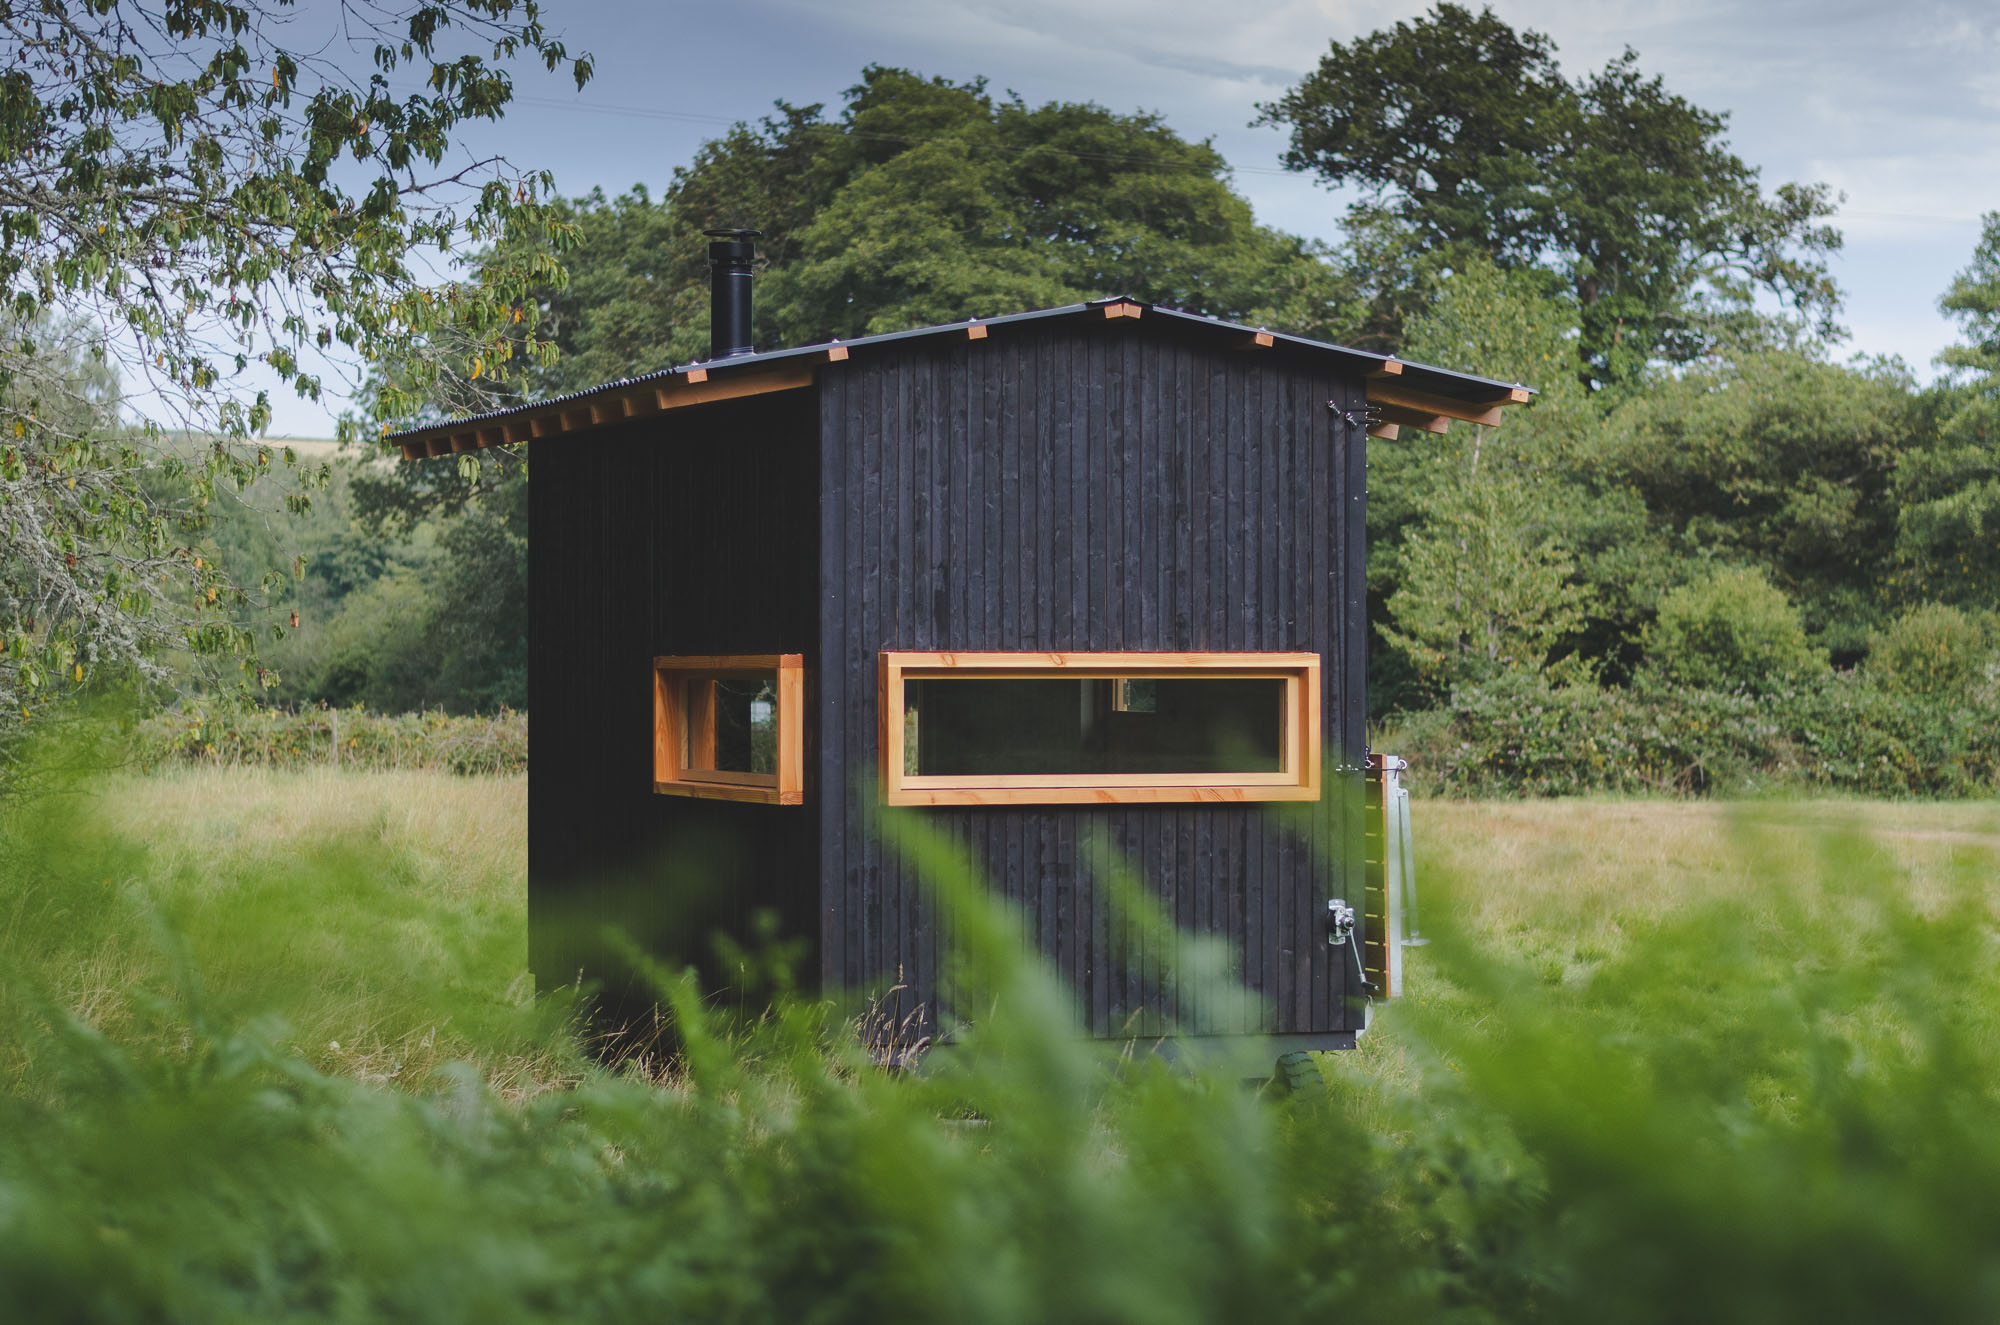 off grid tiny wooden nomad cabin with black cladding in a sunny field